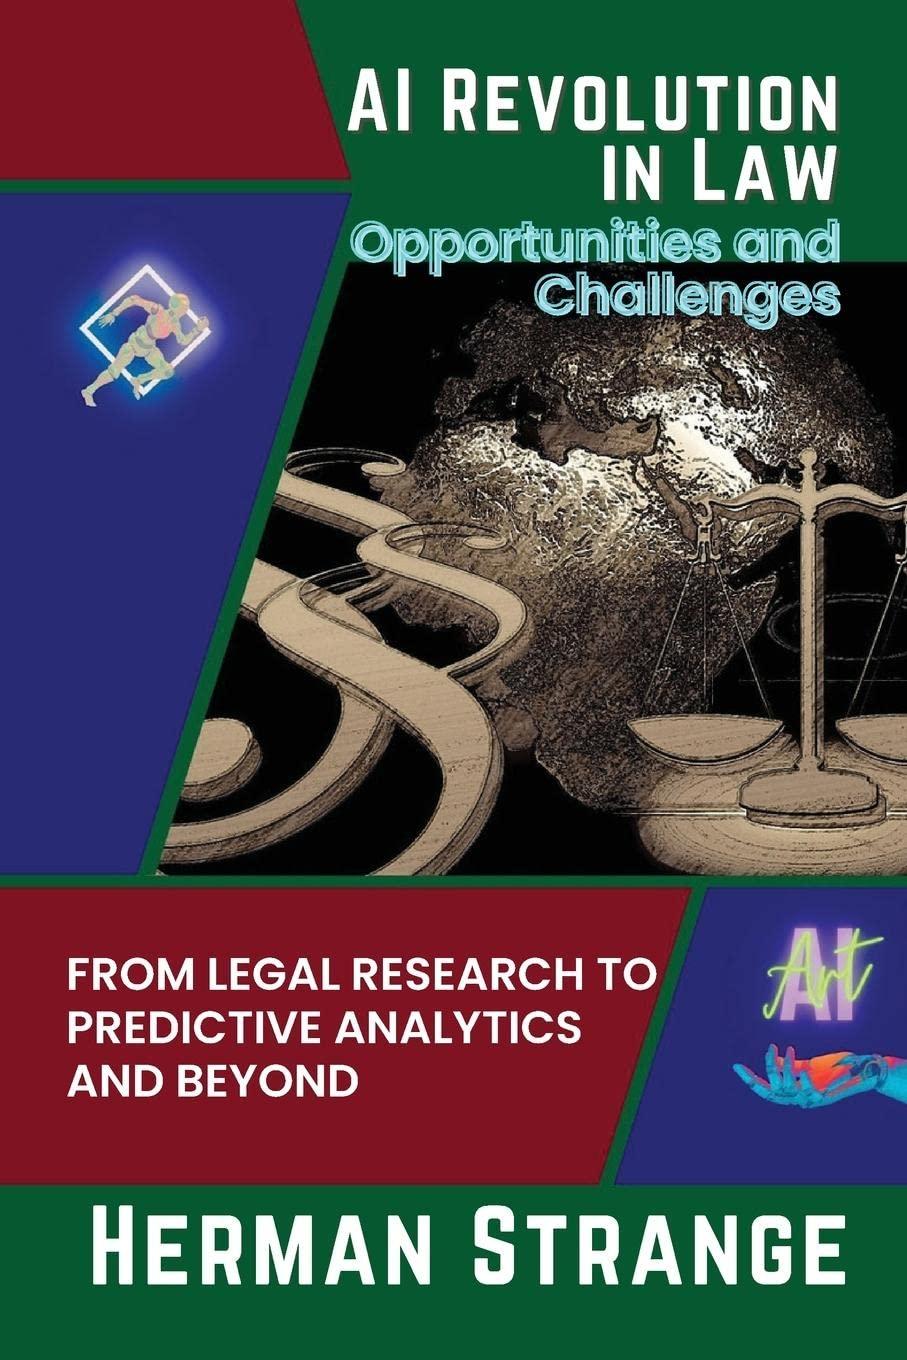 ai revolution in law-opportunities and challenges from legal research to predictive analytics and beyond 1st